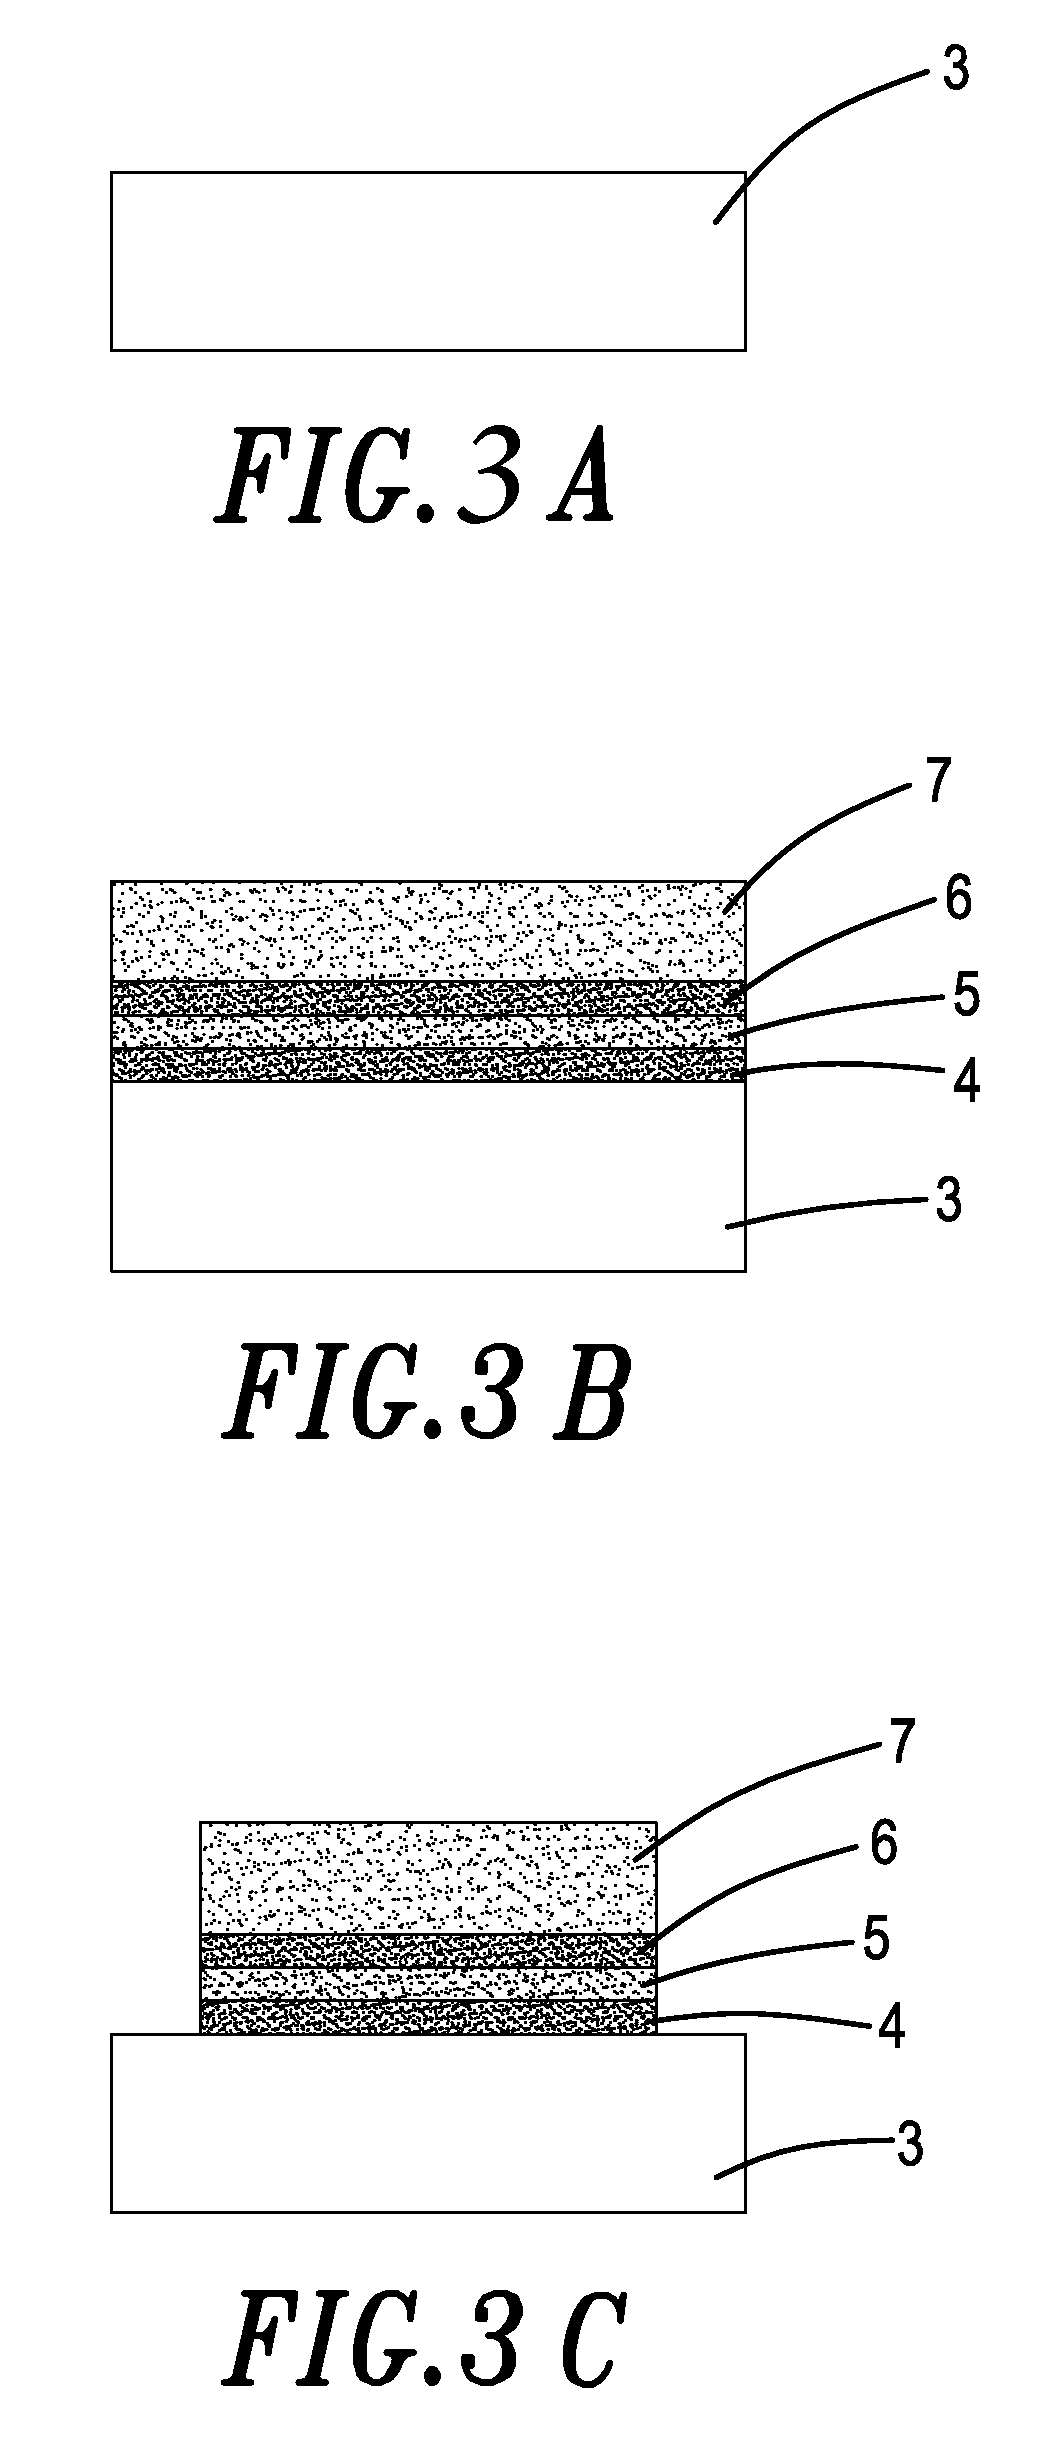 Process for fabricating non-volatile memory by tilt-angle ion implantation